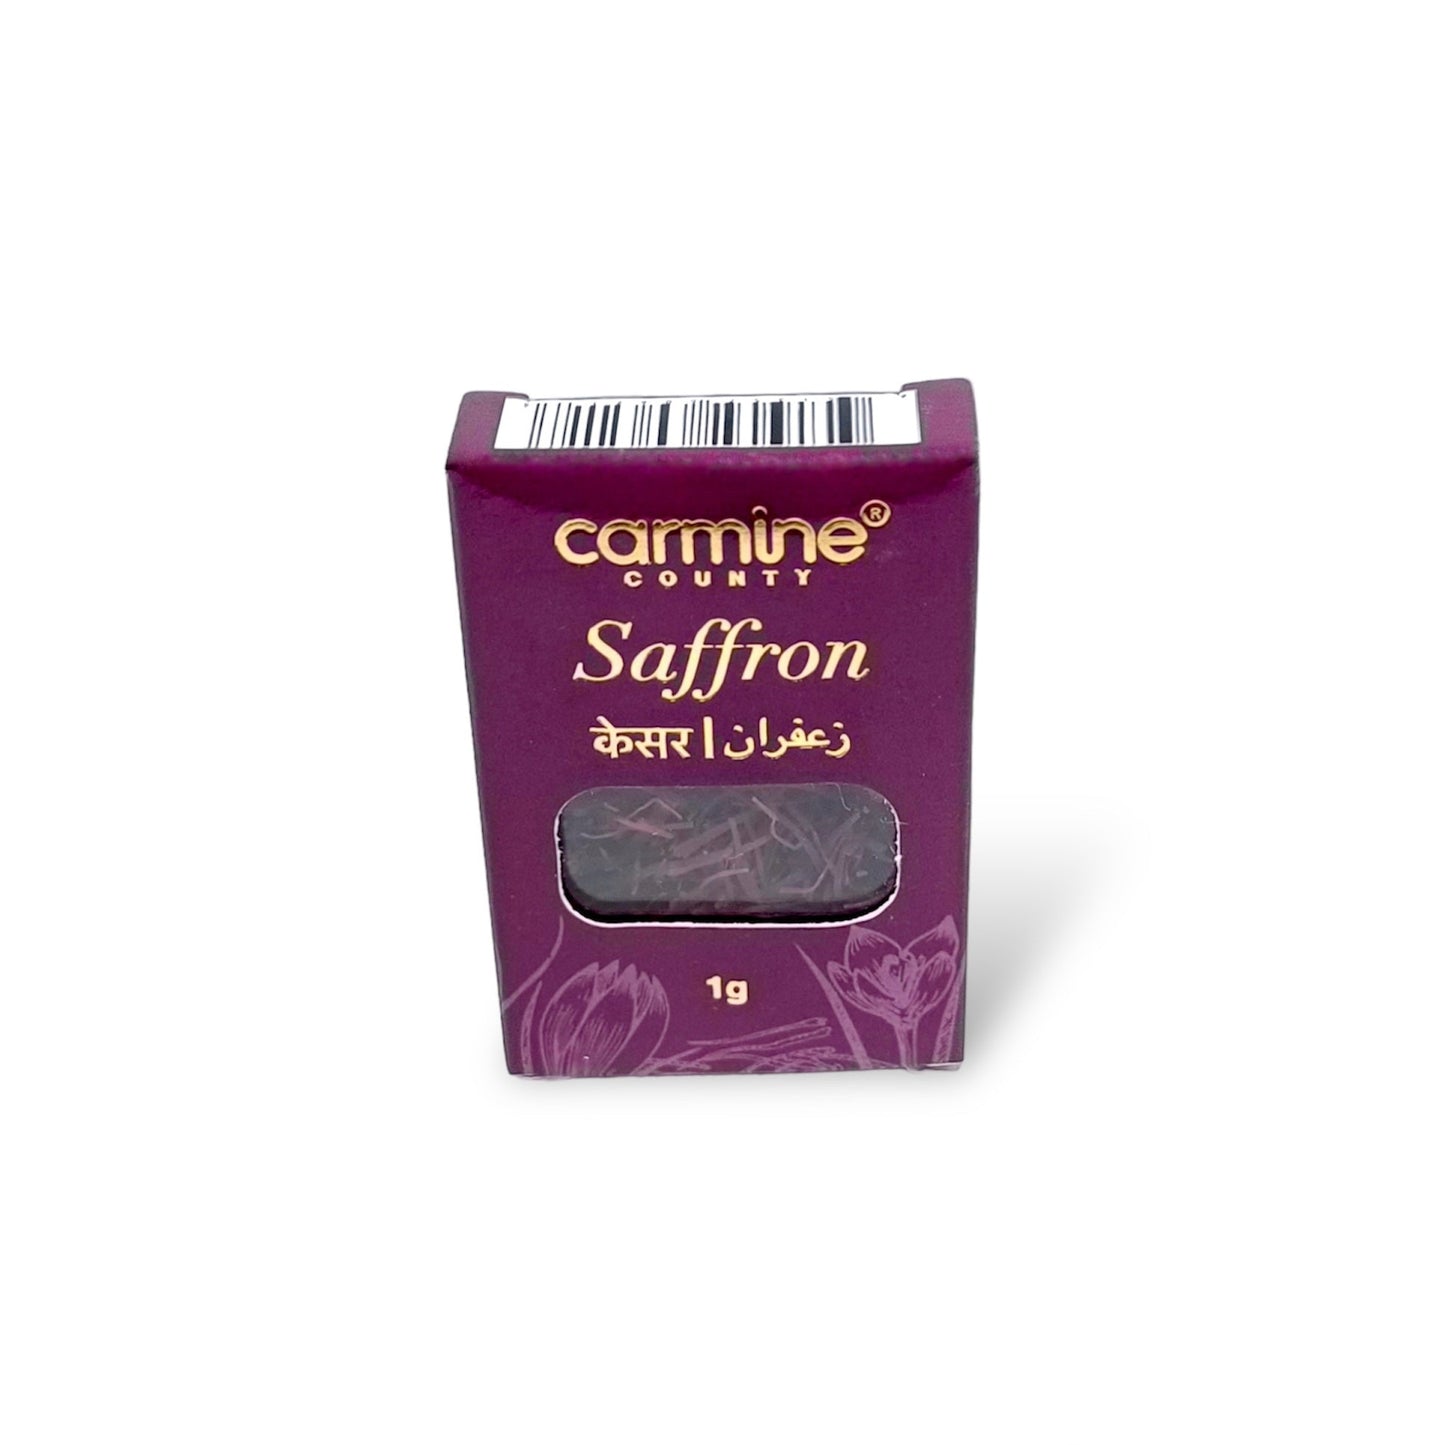 Carmine County Combo of Pure and Natural Saffron Threads 1g, Economy Pack (Pack of 3)